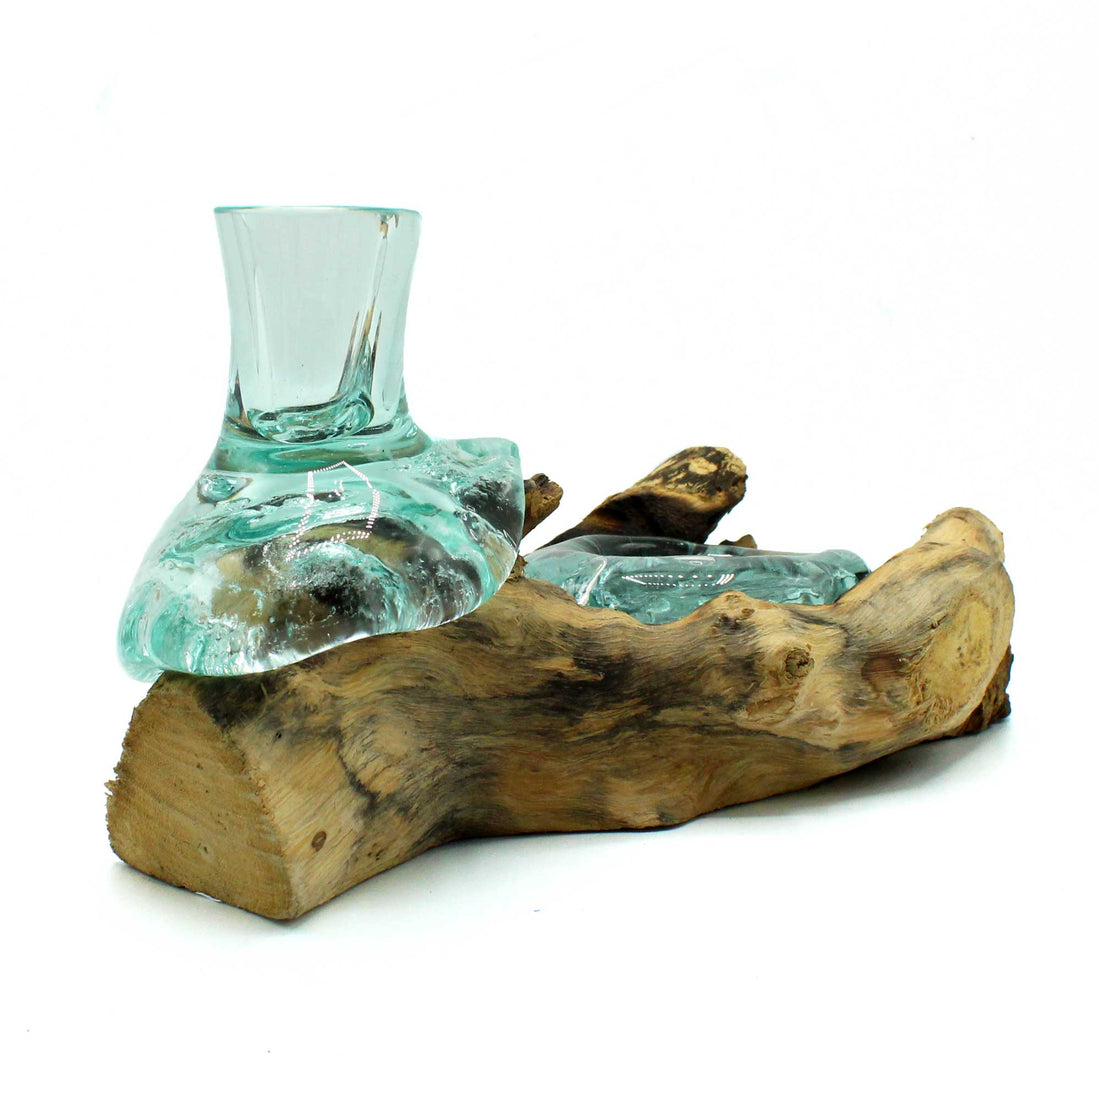 Molten Glass Small Flower Vase and Tealight Holder on Wood - best price from Maltashopper.com MGW-35